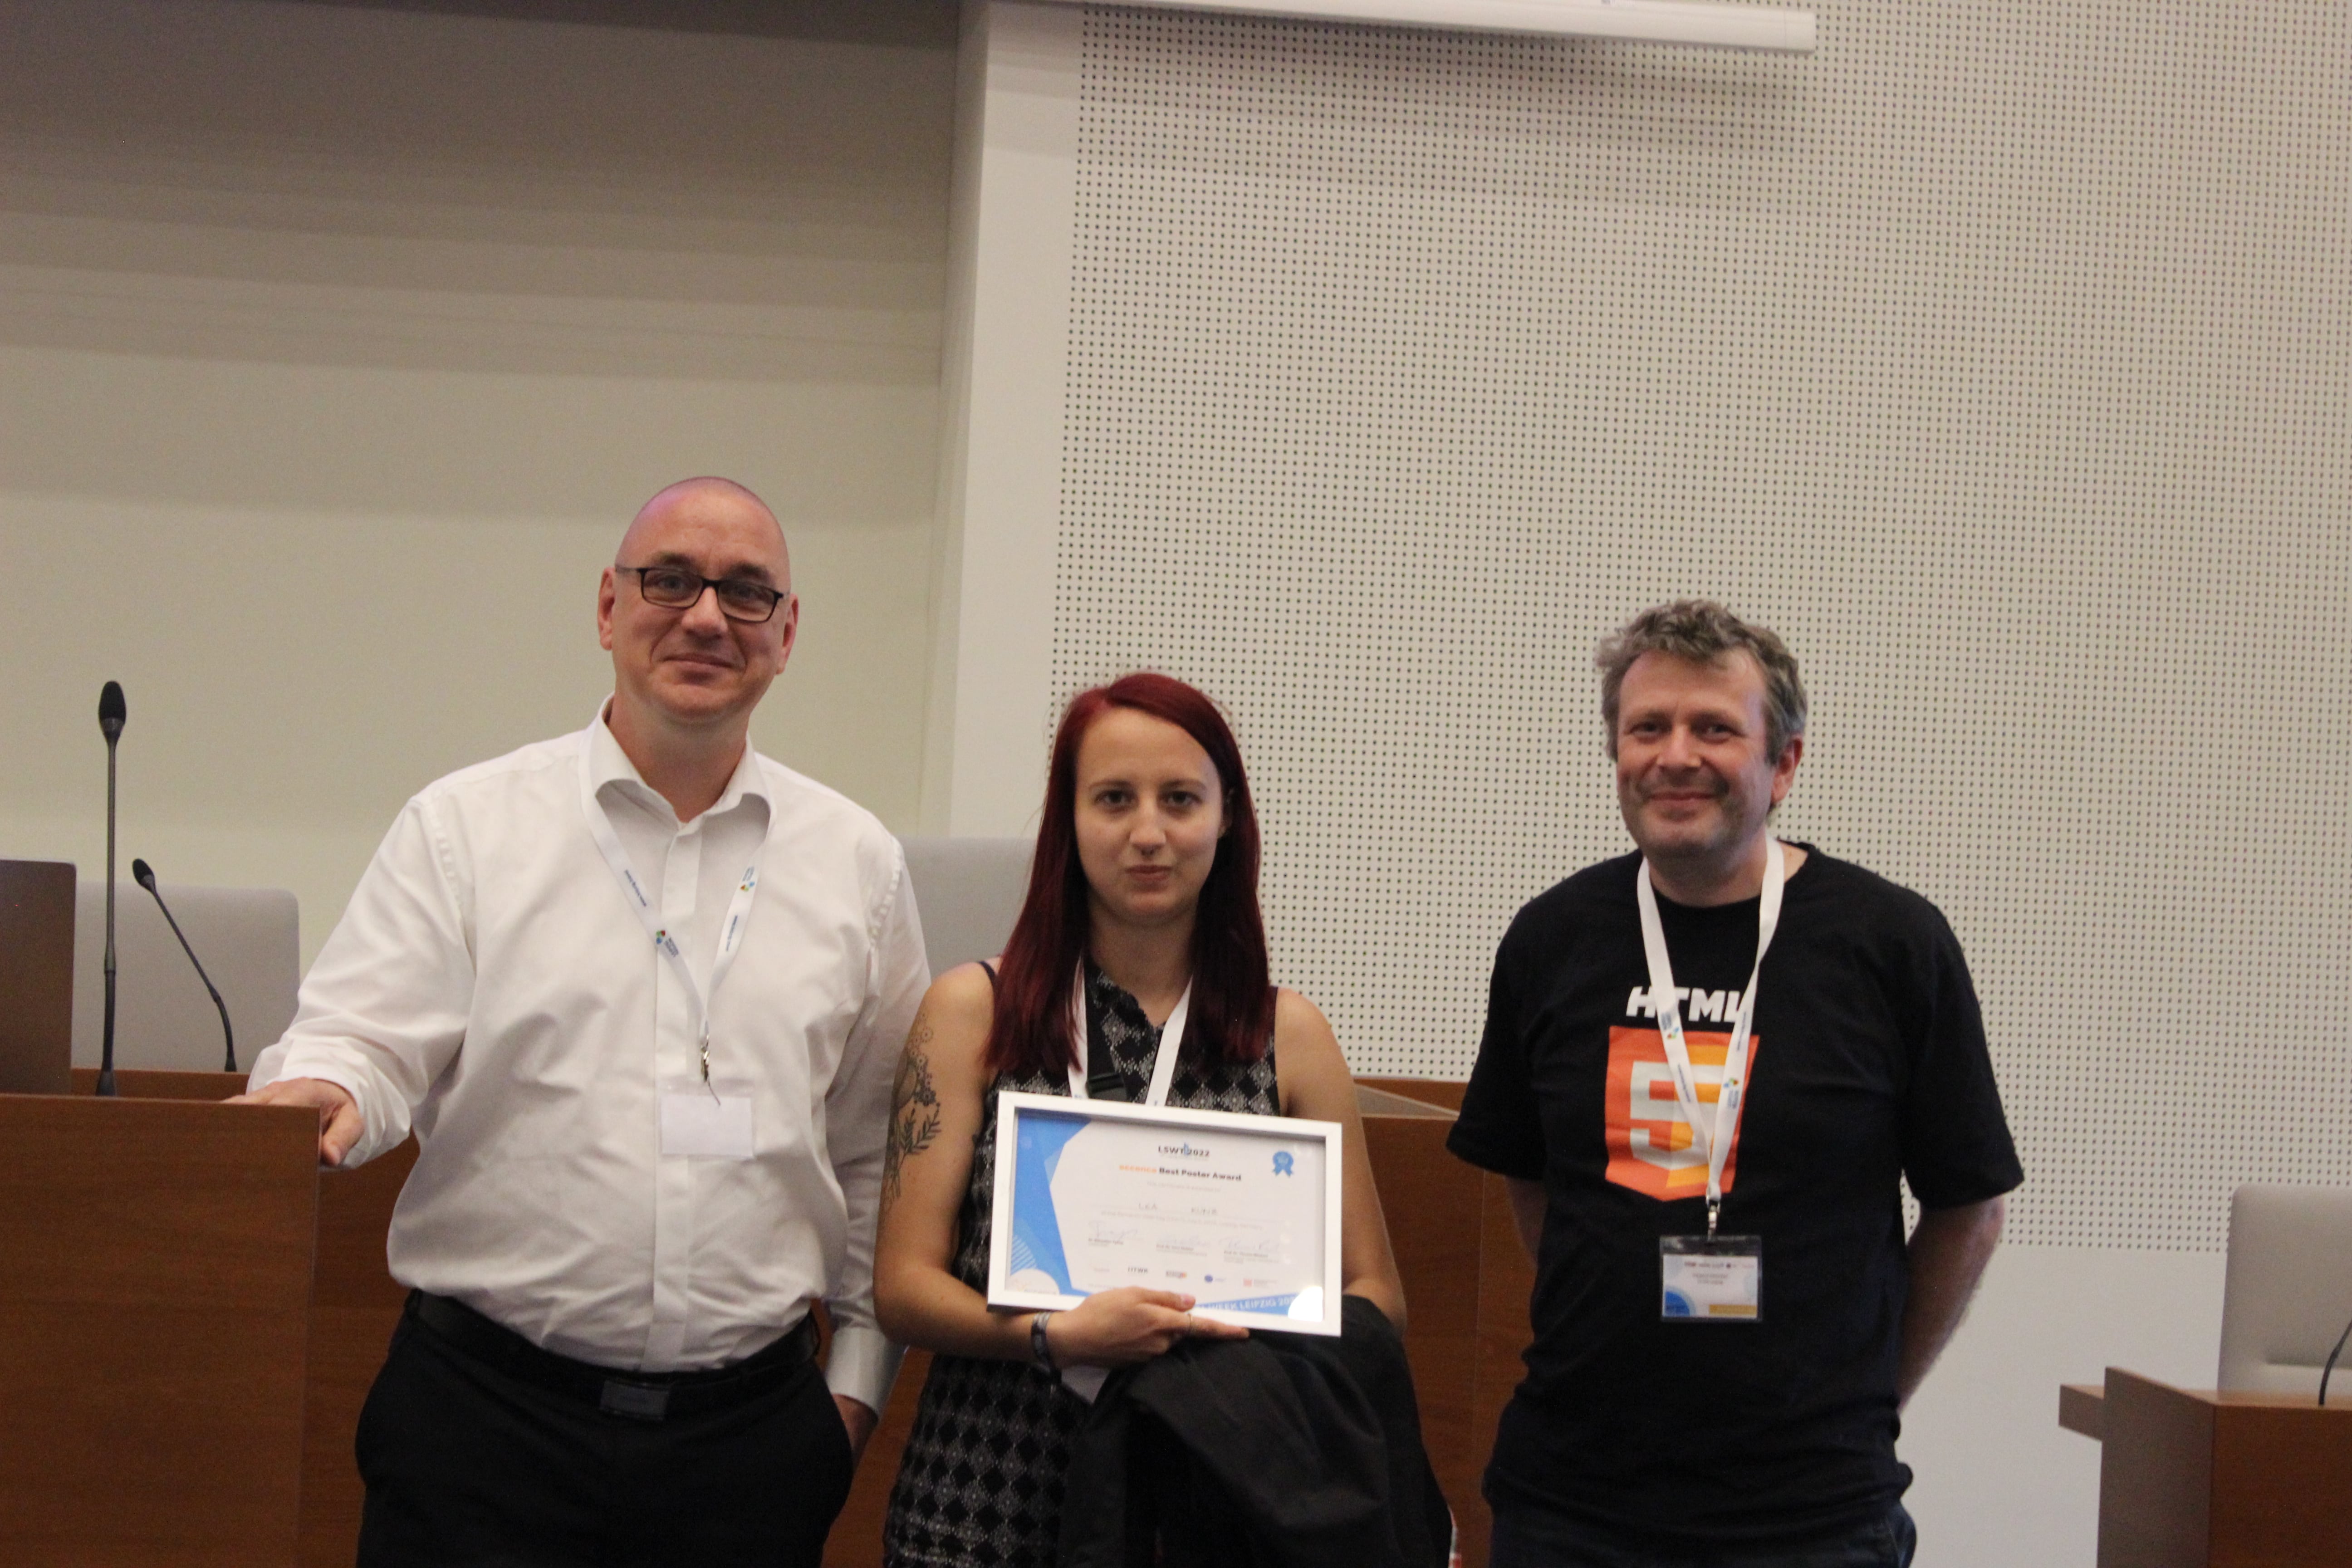 Image of award ceremony of LSWT poster session